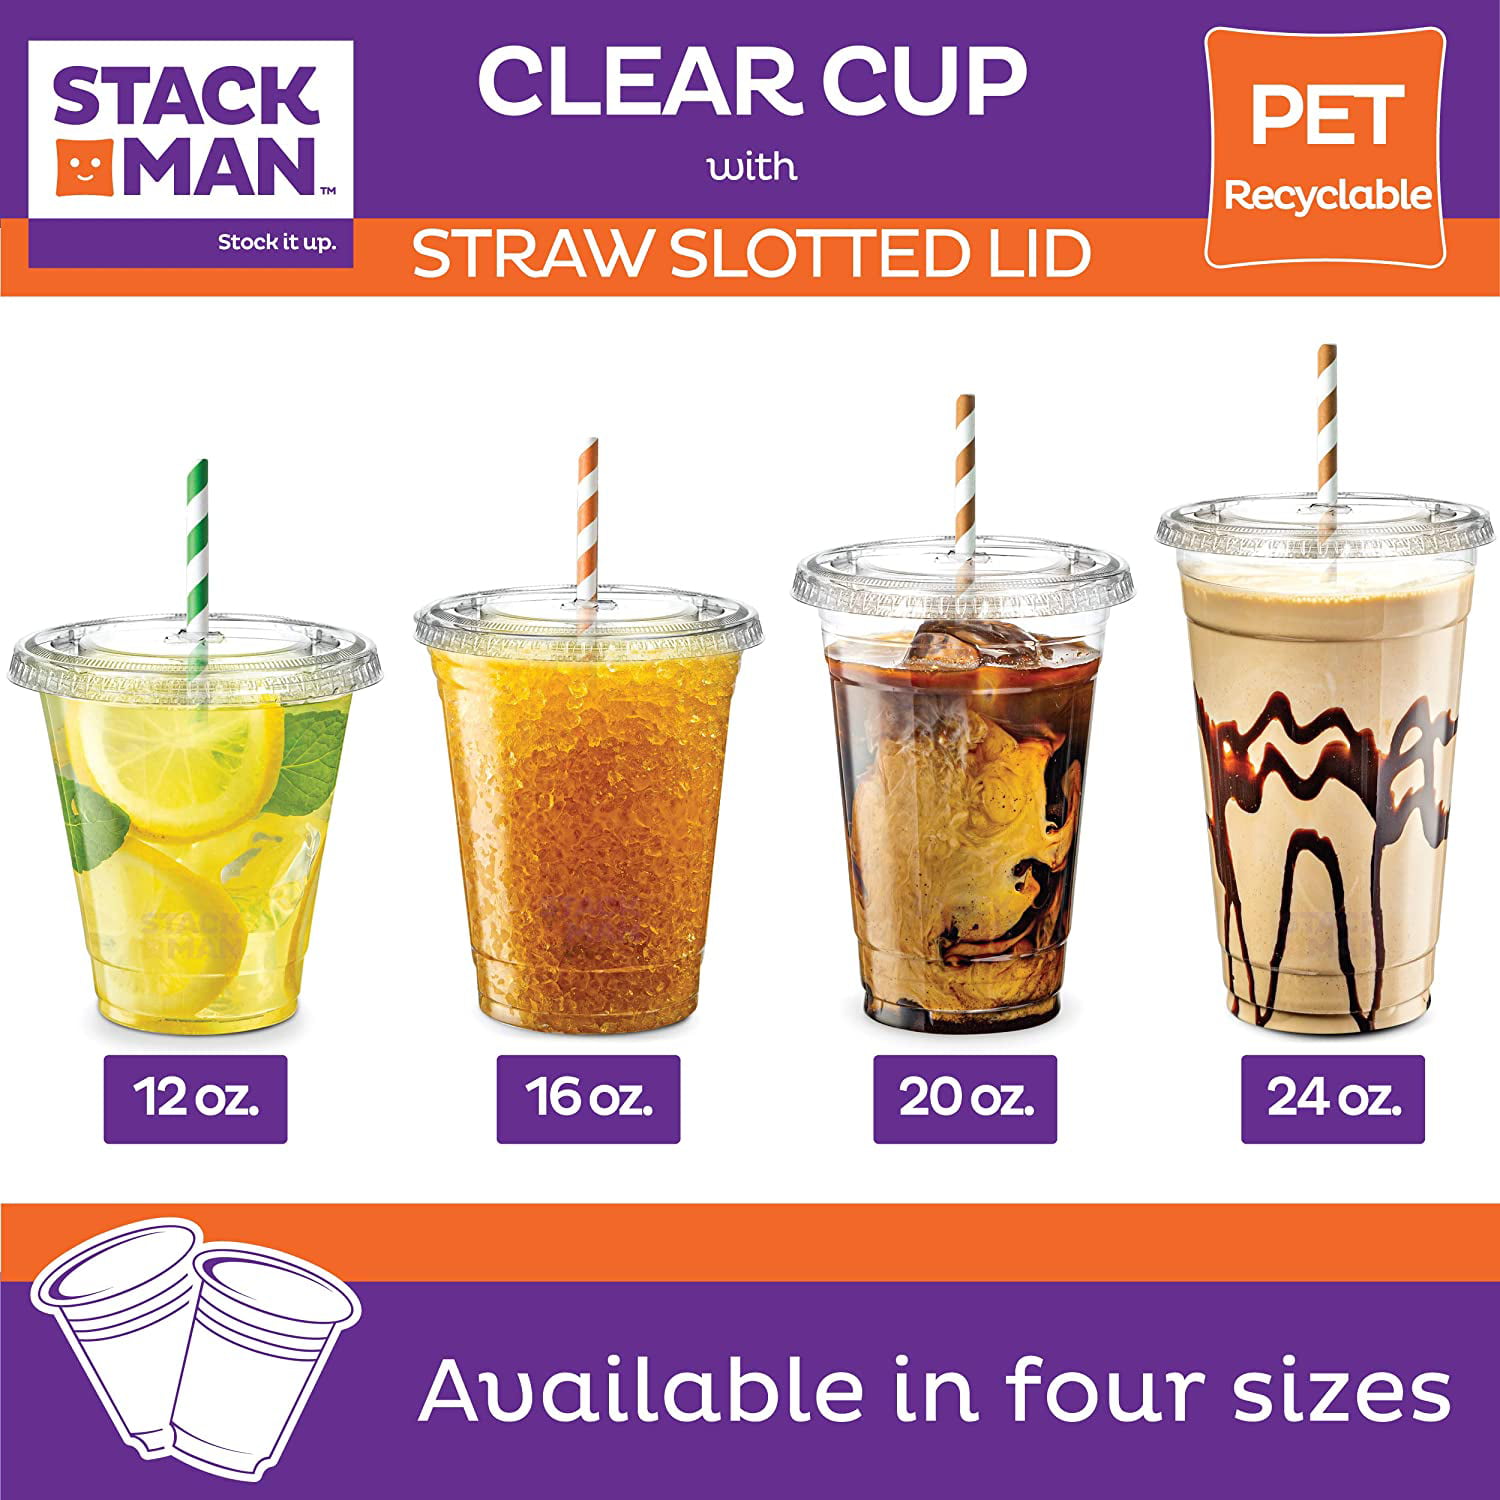 12oz Crystal Clear Plastic Cups with Flat Lids and White Paper Straws - for Summary Beverage, Party, To-Go (100)